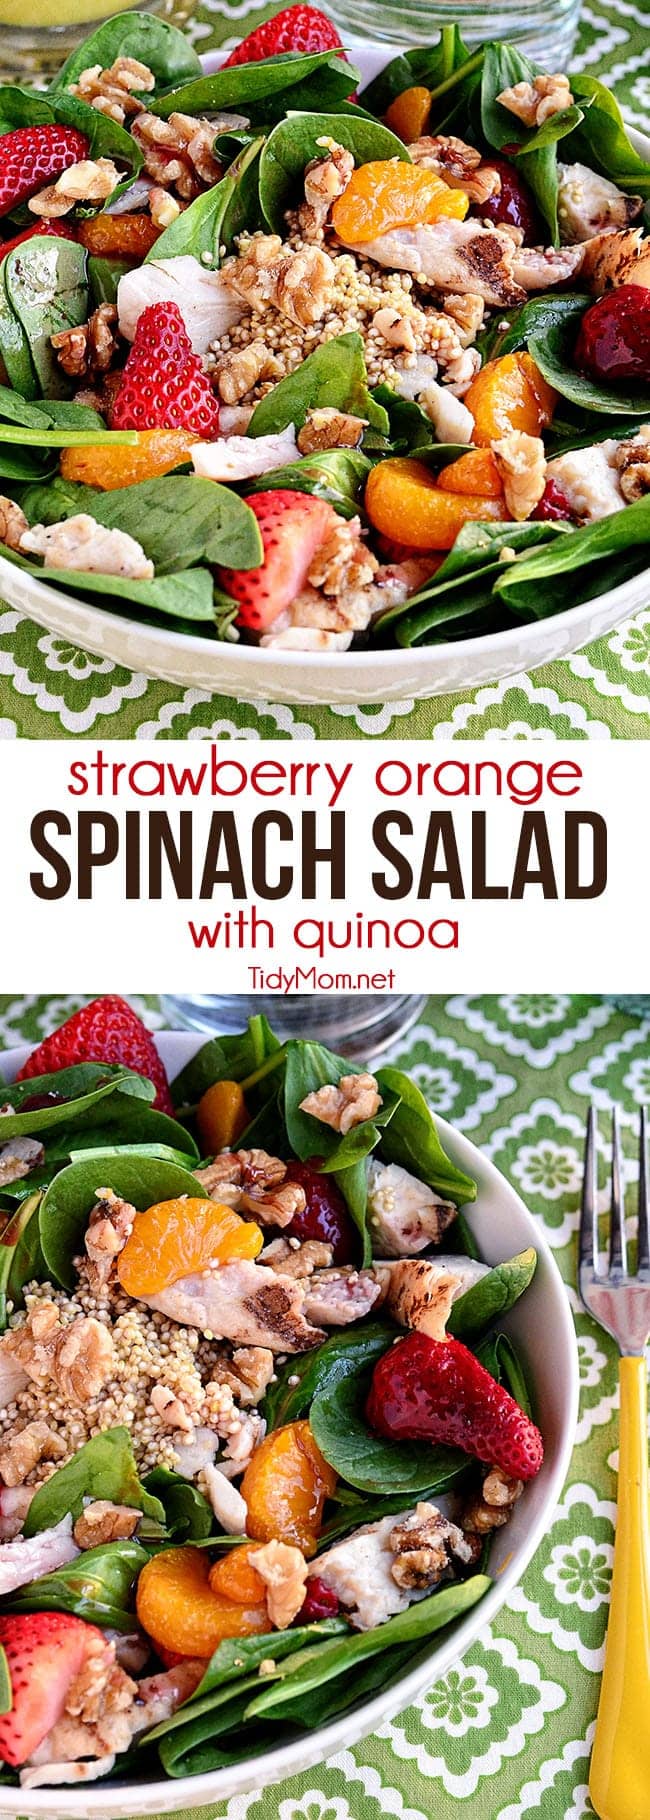 A hearty spring Strawberry Orange Spinach Salad with Quinoa is full of protein. Perfect for lunch or dinner on warm spring days. Print full recipe at TidyMom.net